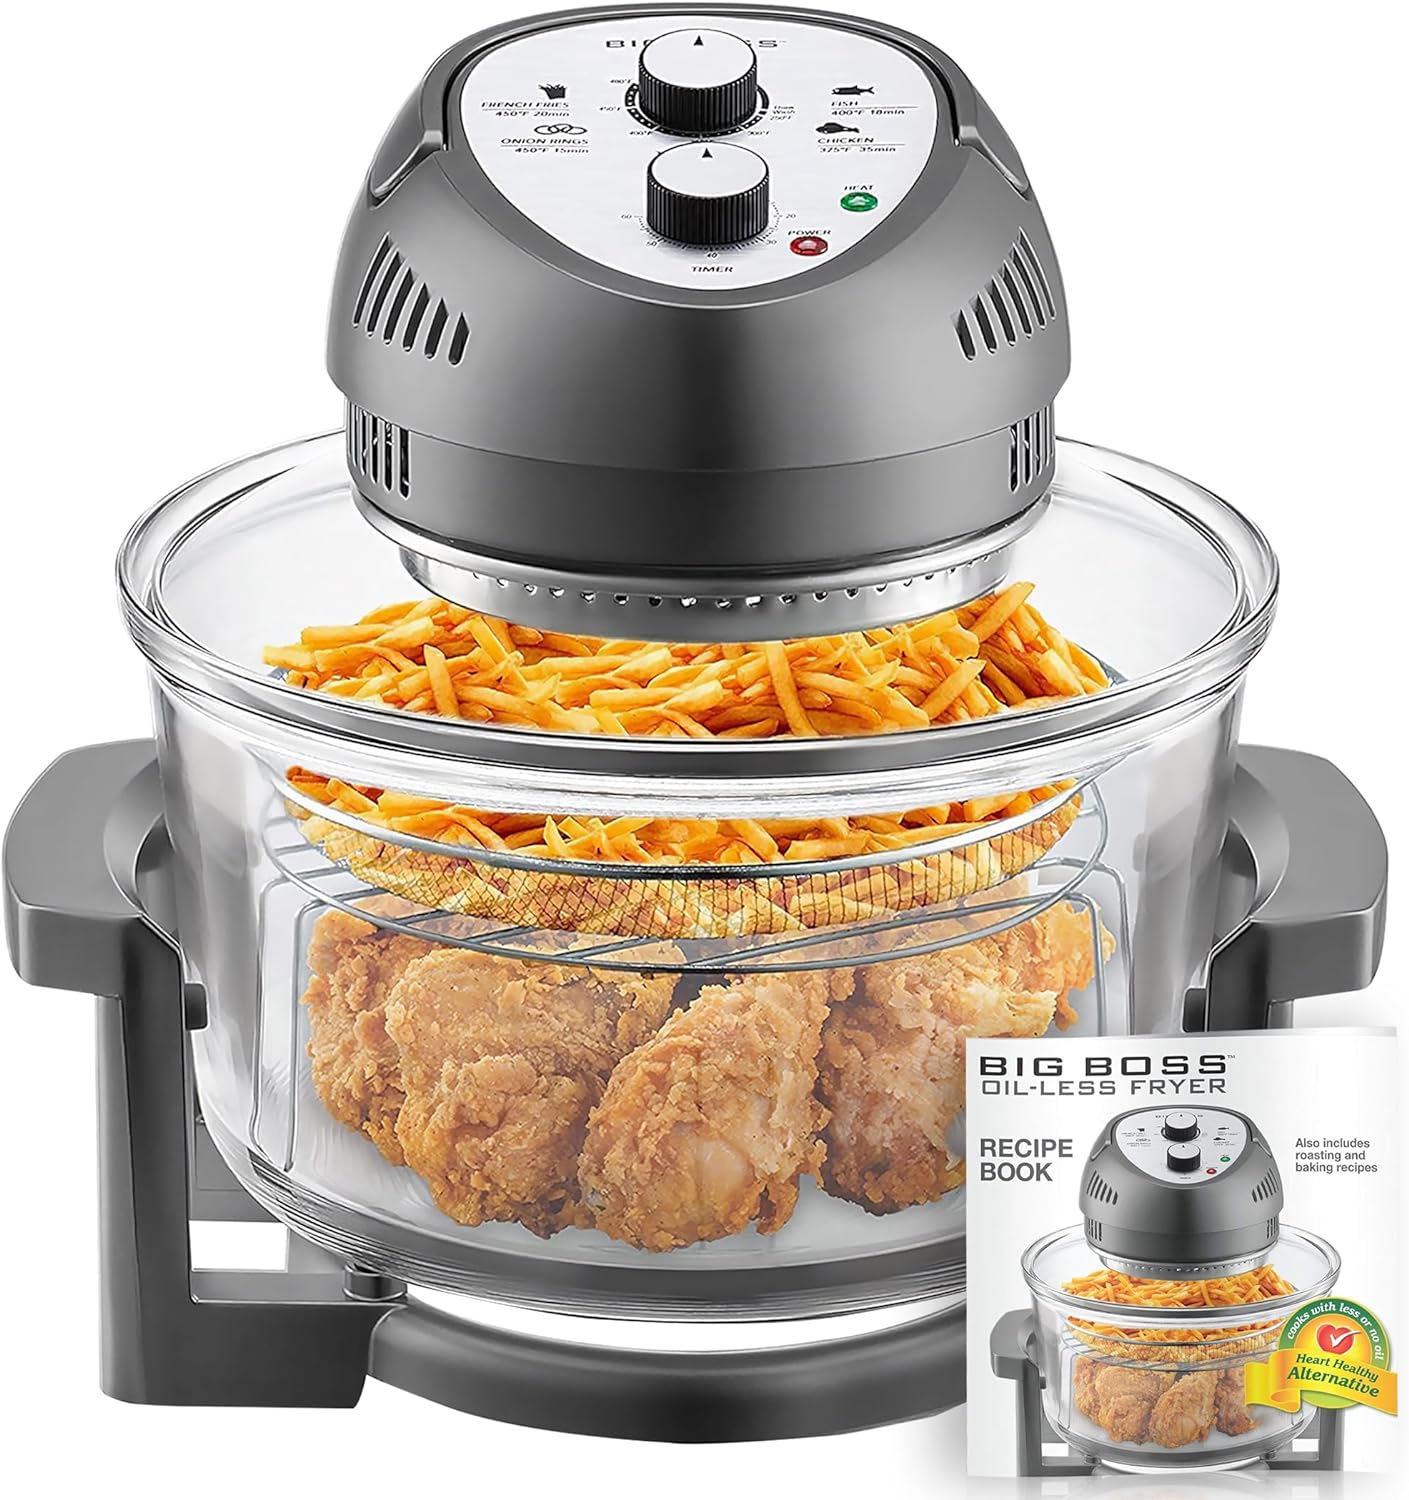 Big Boss 16Qt Large Air Fryer Oven with 50+ Recipe Book AirFryer Oven Makes Healthier Crispy Foods Gray - image 1 of 9